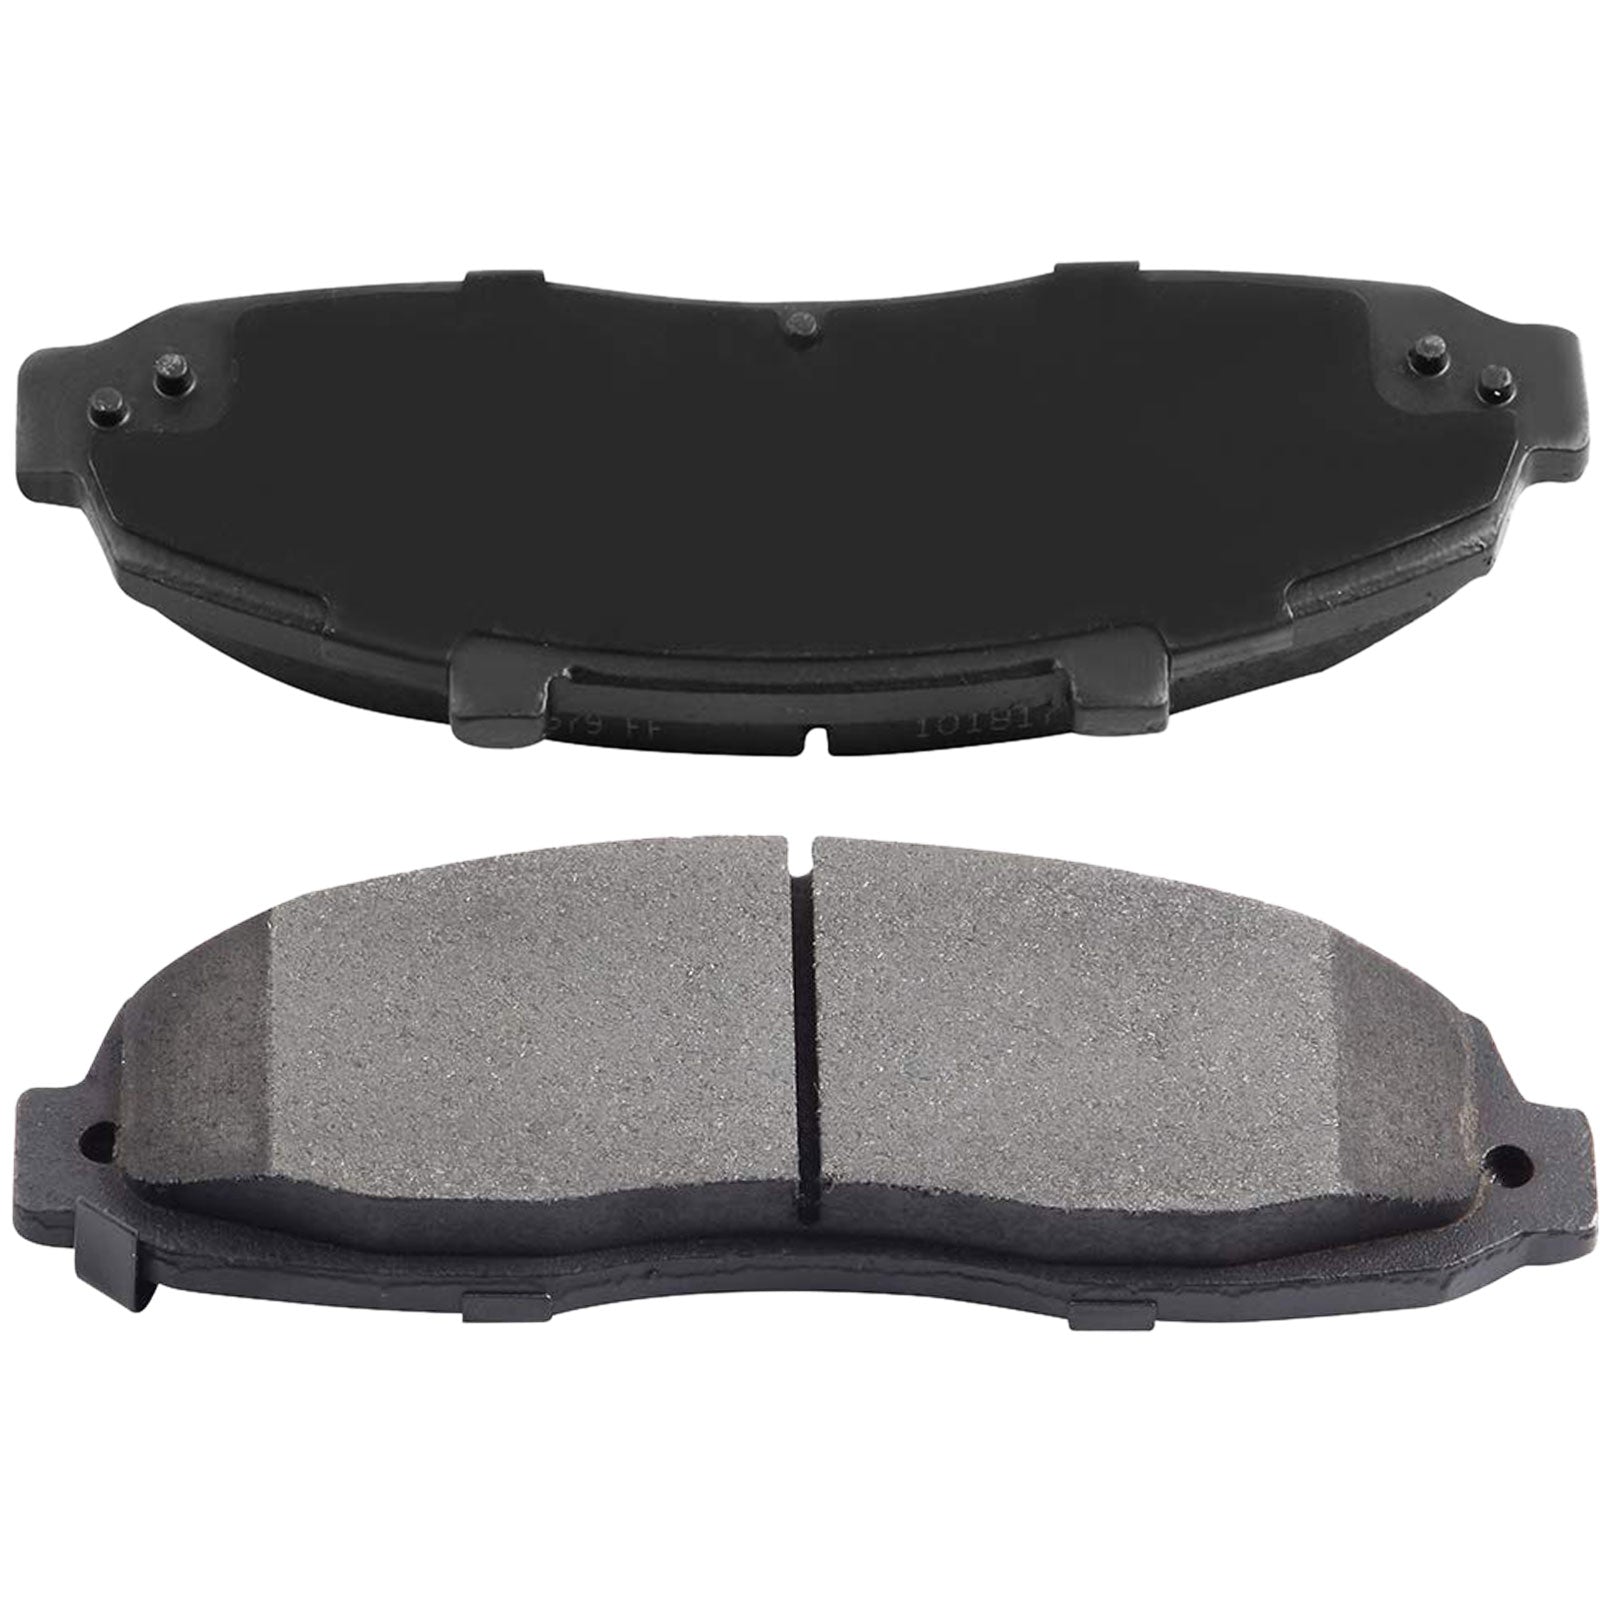 JADODE 4x Front Ceramic Brake Pads for 1997- 2000 2001 2002 2003 Ford F-150 w/Hardware